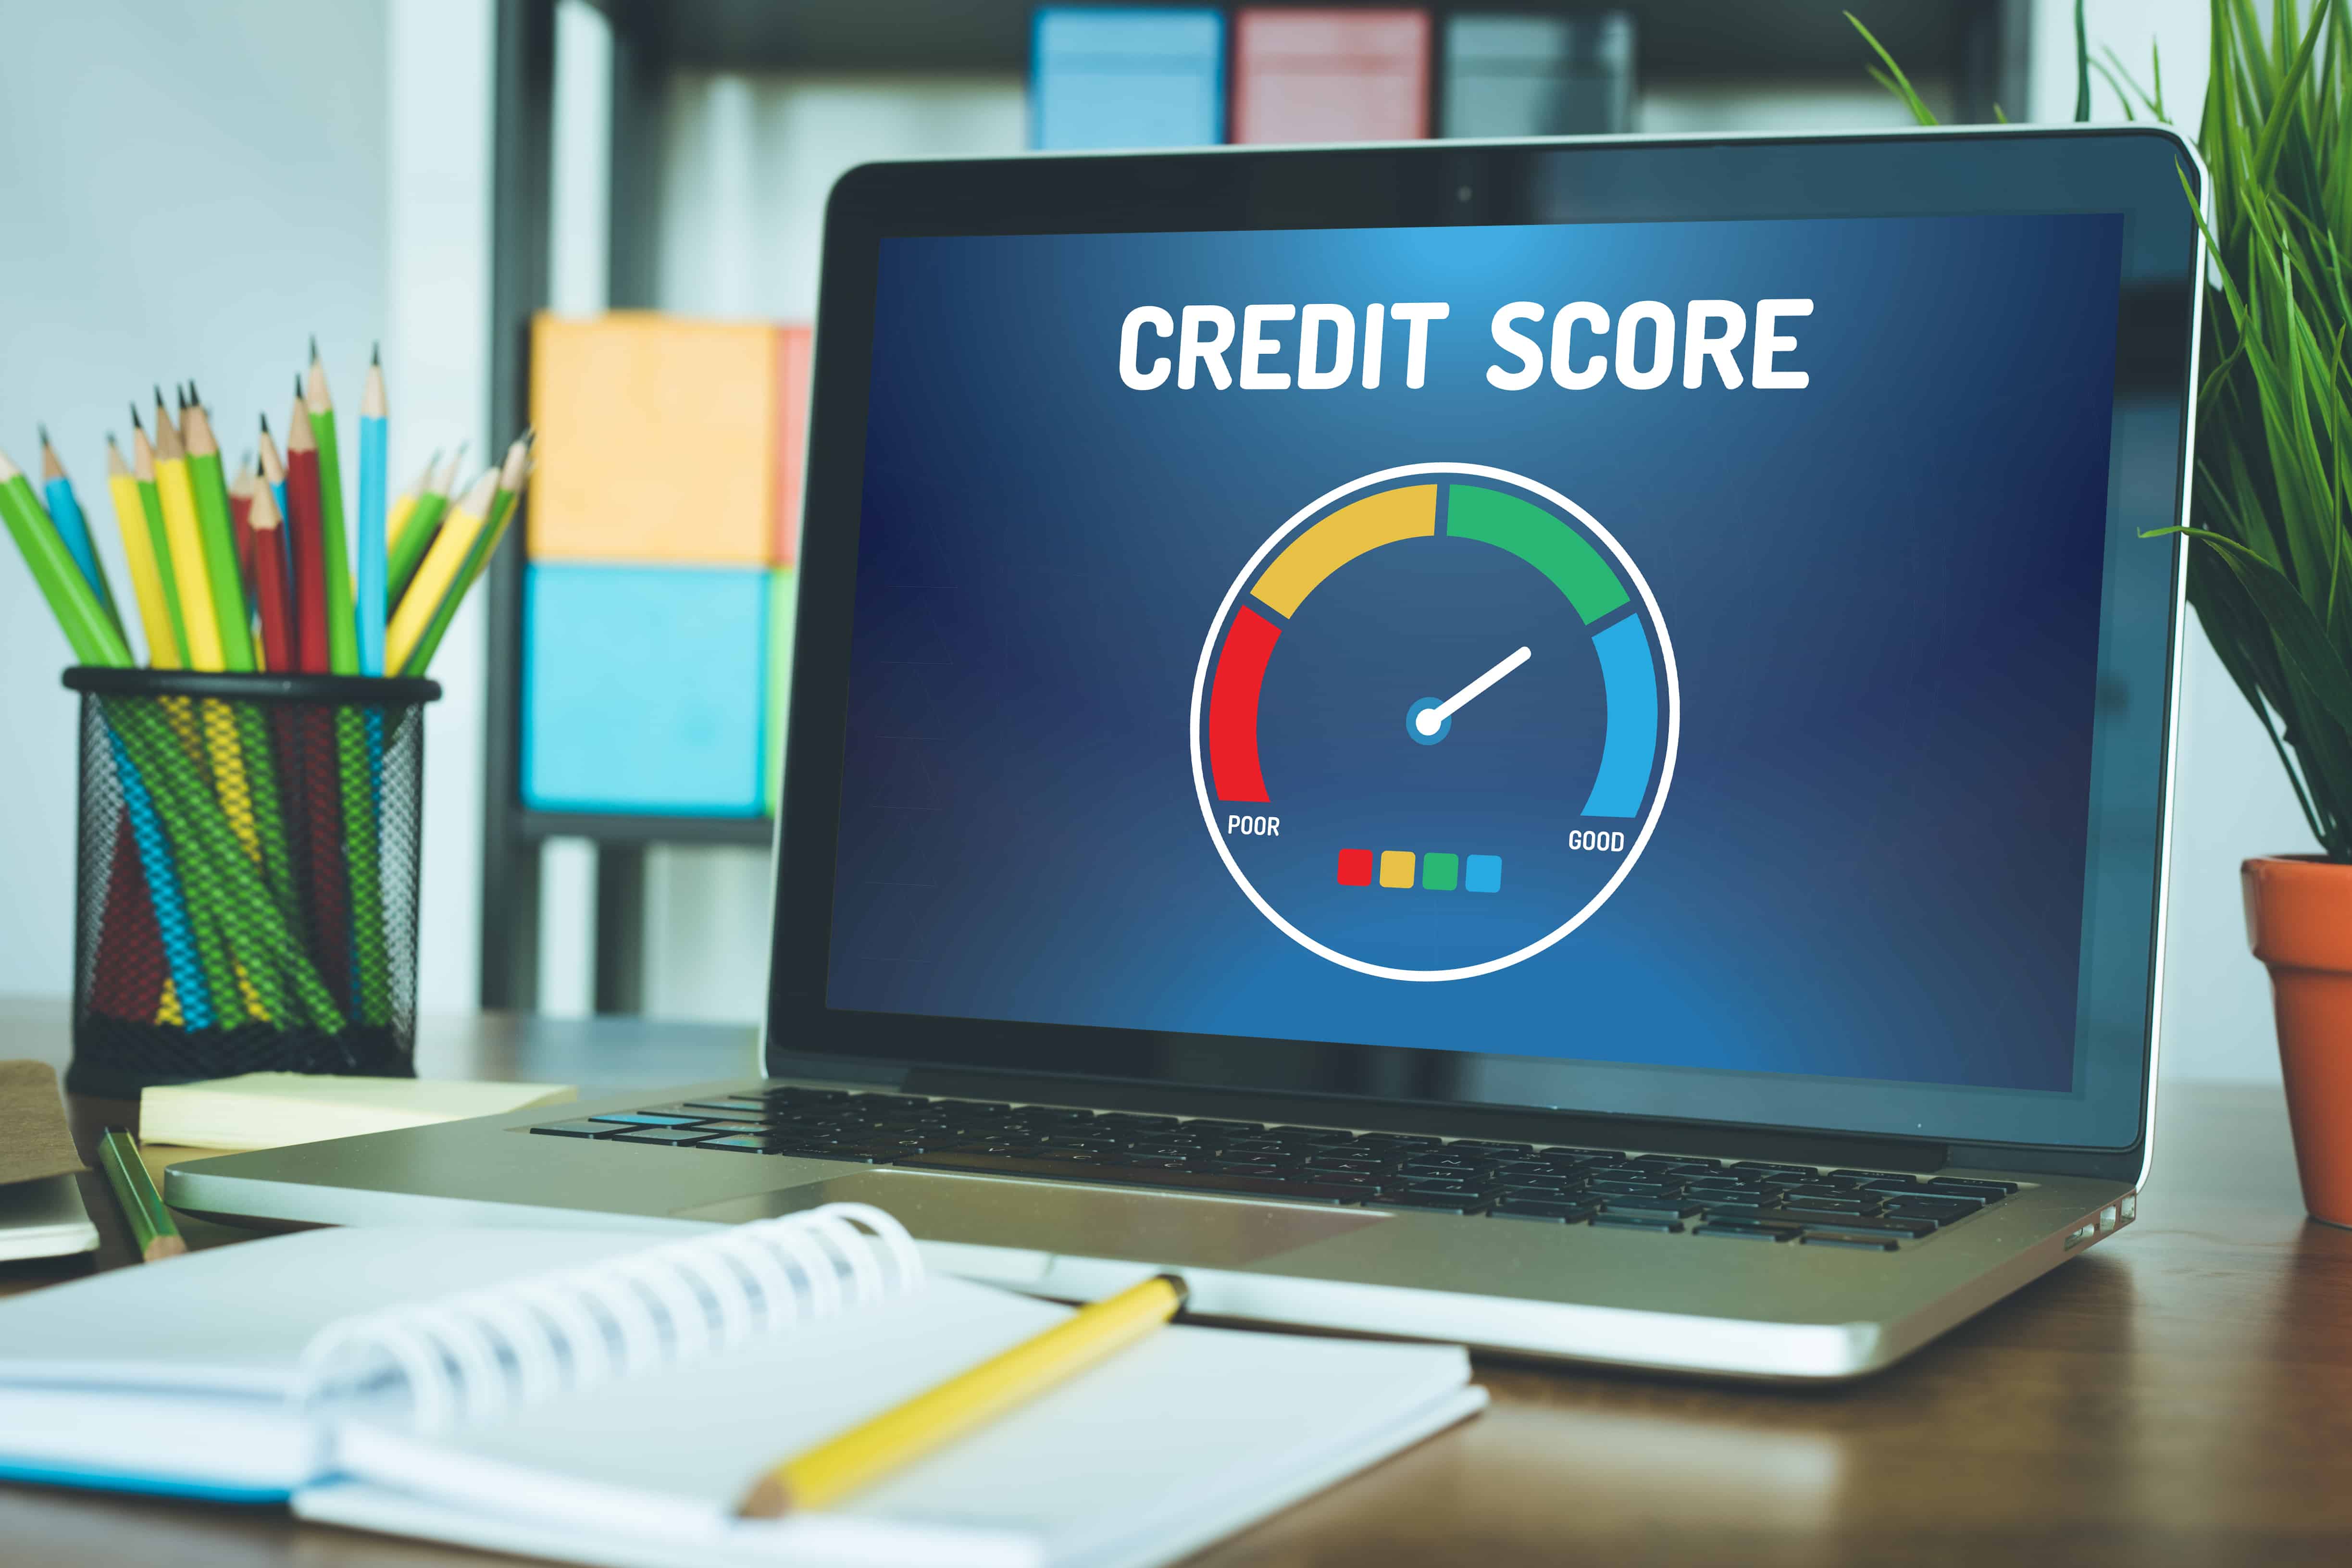 Mortgage Guarantee Scheme credit scoring requires attention